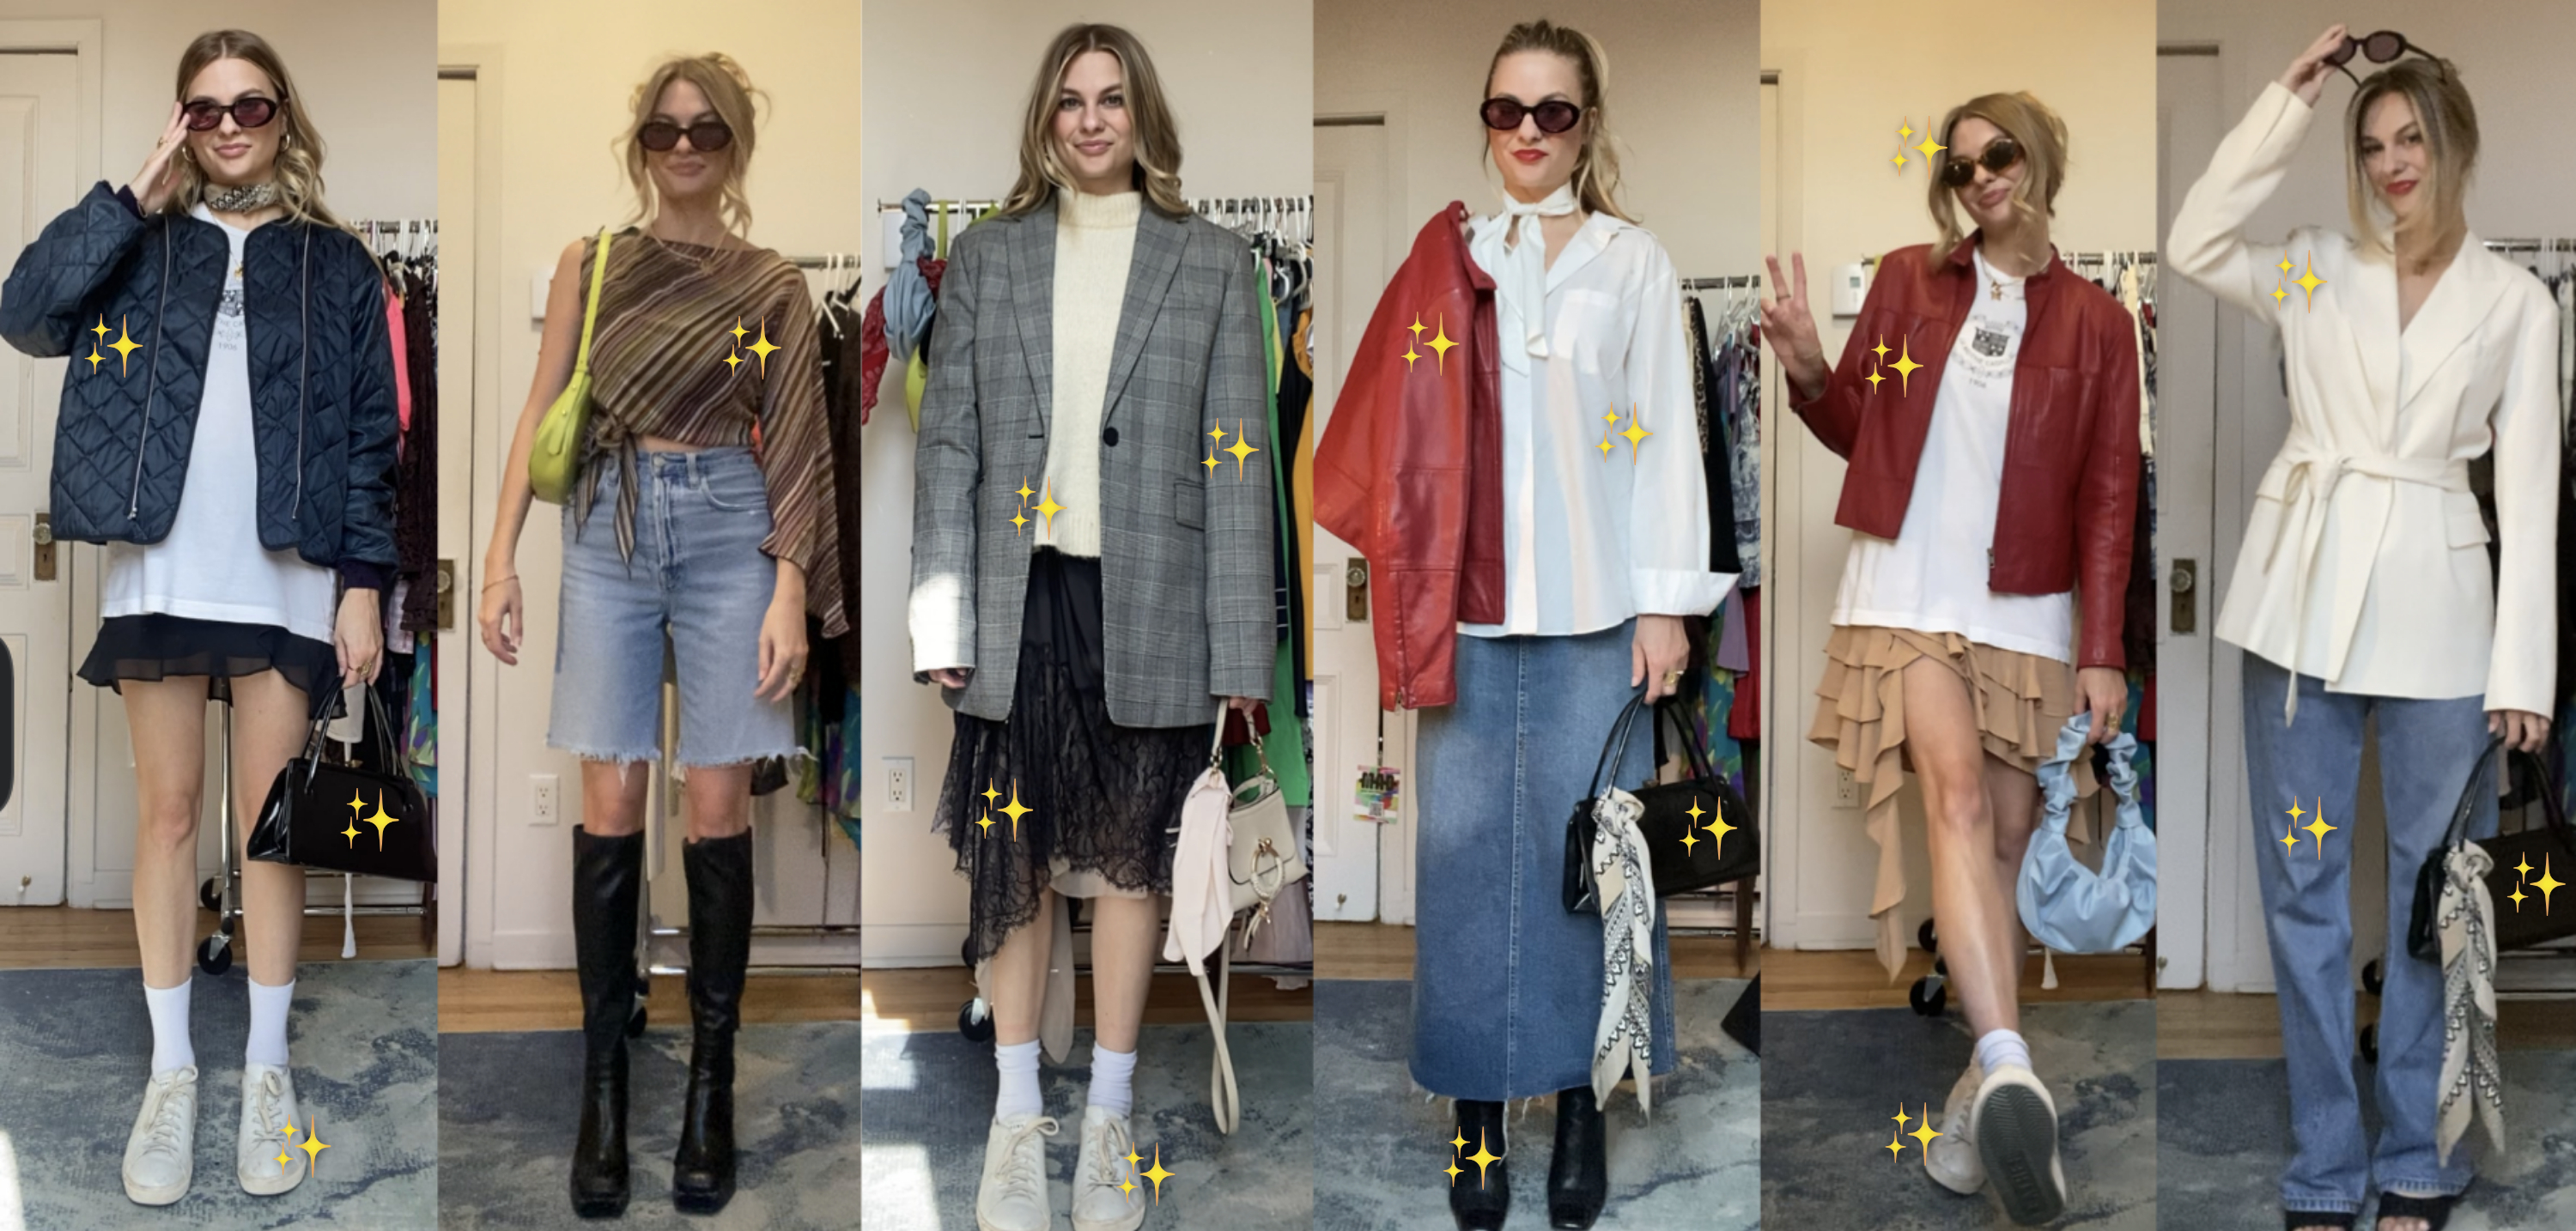 Six outfits I styled based off the Pinterest formula. There are stars marking which items are thrifted or secondhand